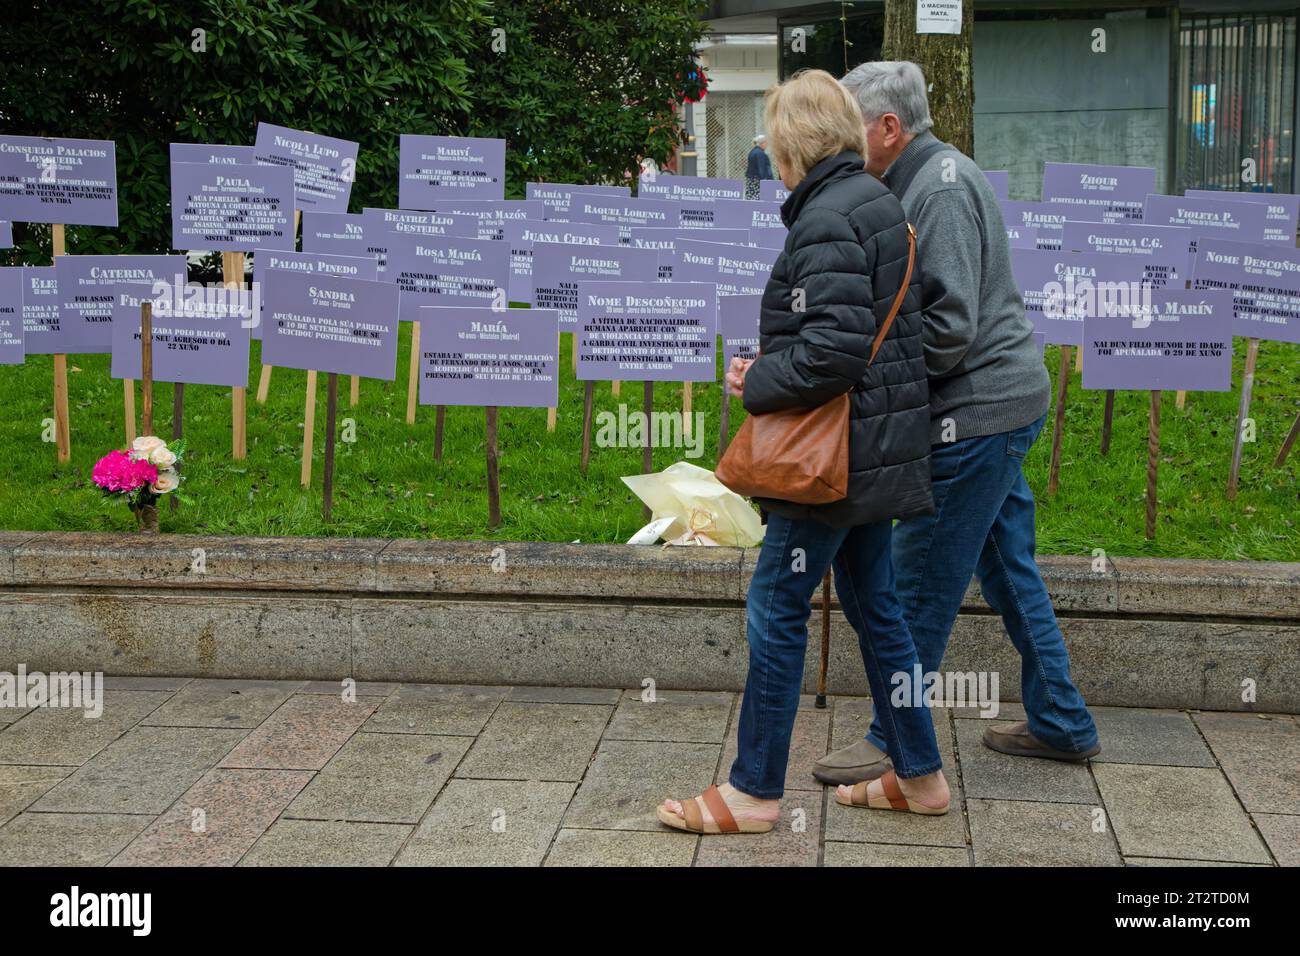 LUGO, October 4, 2023 : An old couple walks in front of posters against femicide rates in Spain Stock Photo